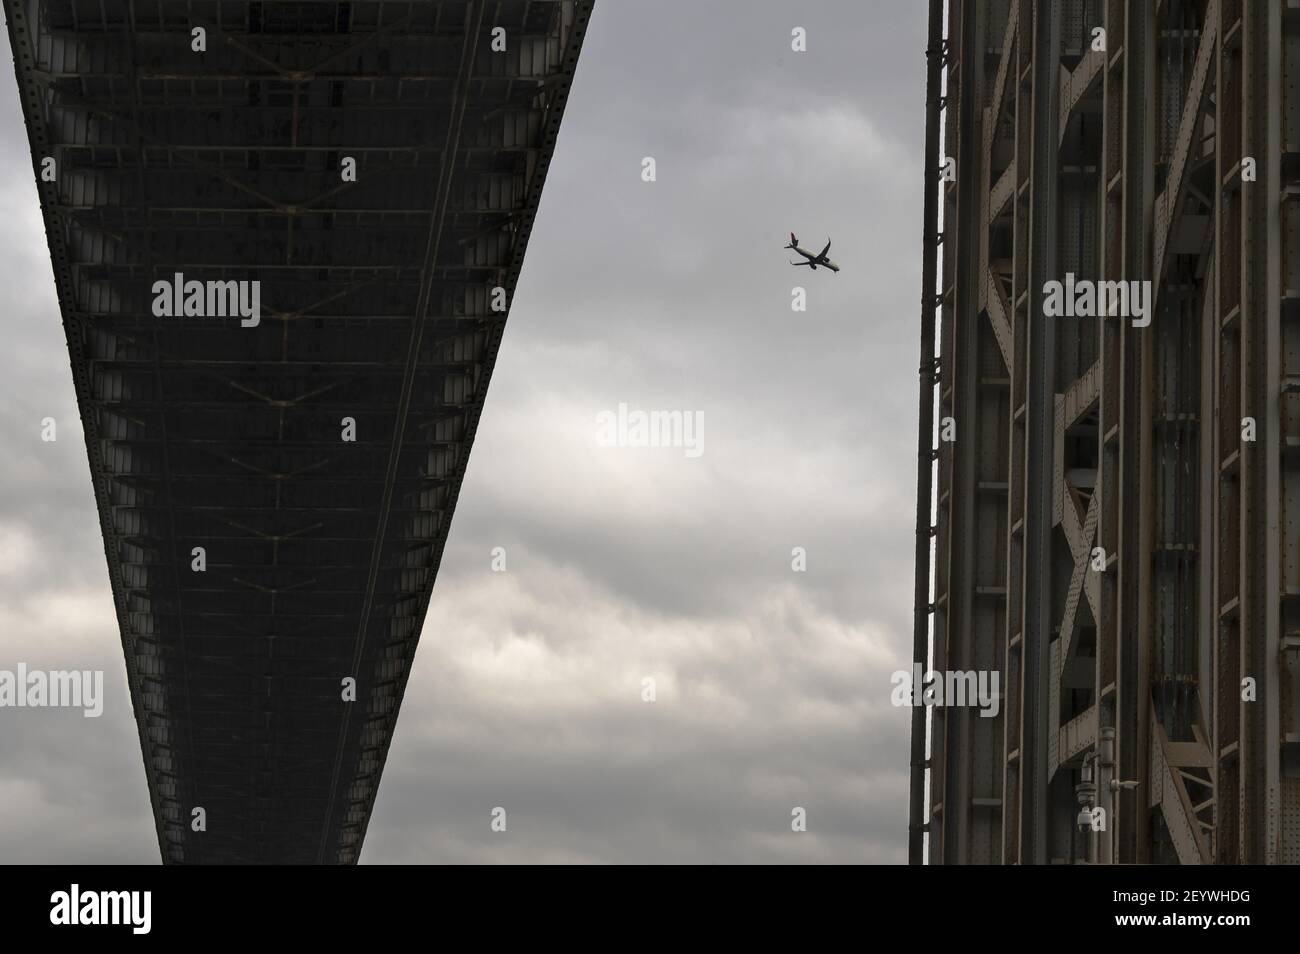 Airplane seen against a cloudy sky through the metal structure of George Washington Bridge. Stock Photo